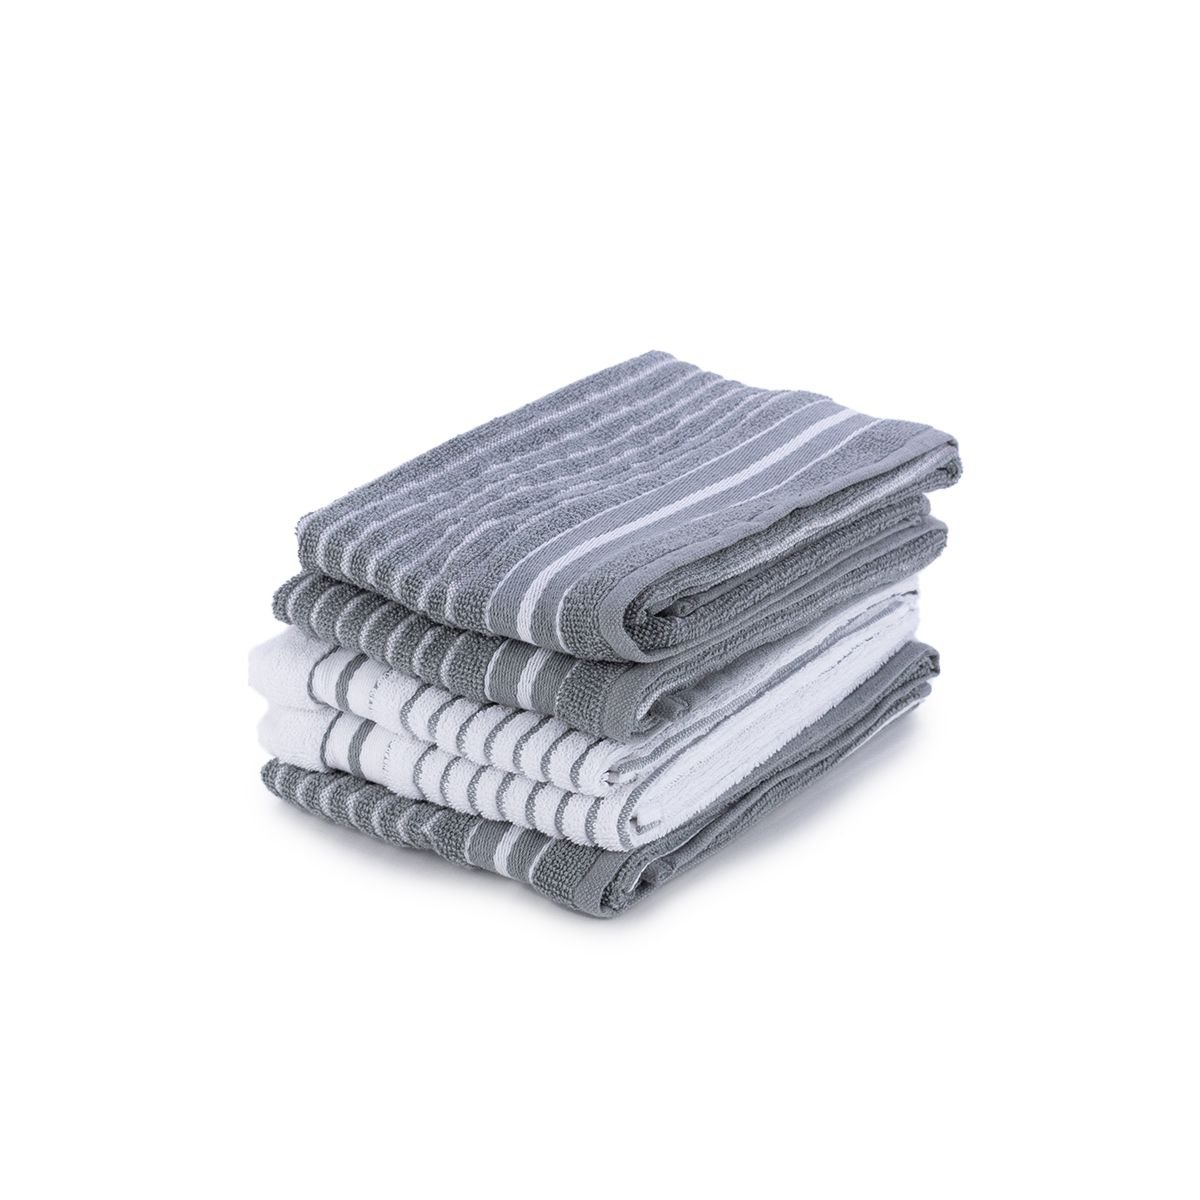 Everything Kitchens Modern Essentials Oversized Recycled Cotton Terry Kitchen Towels (Set of 5) | Grey & White